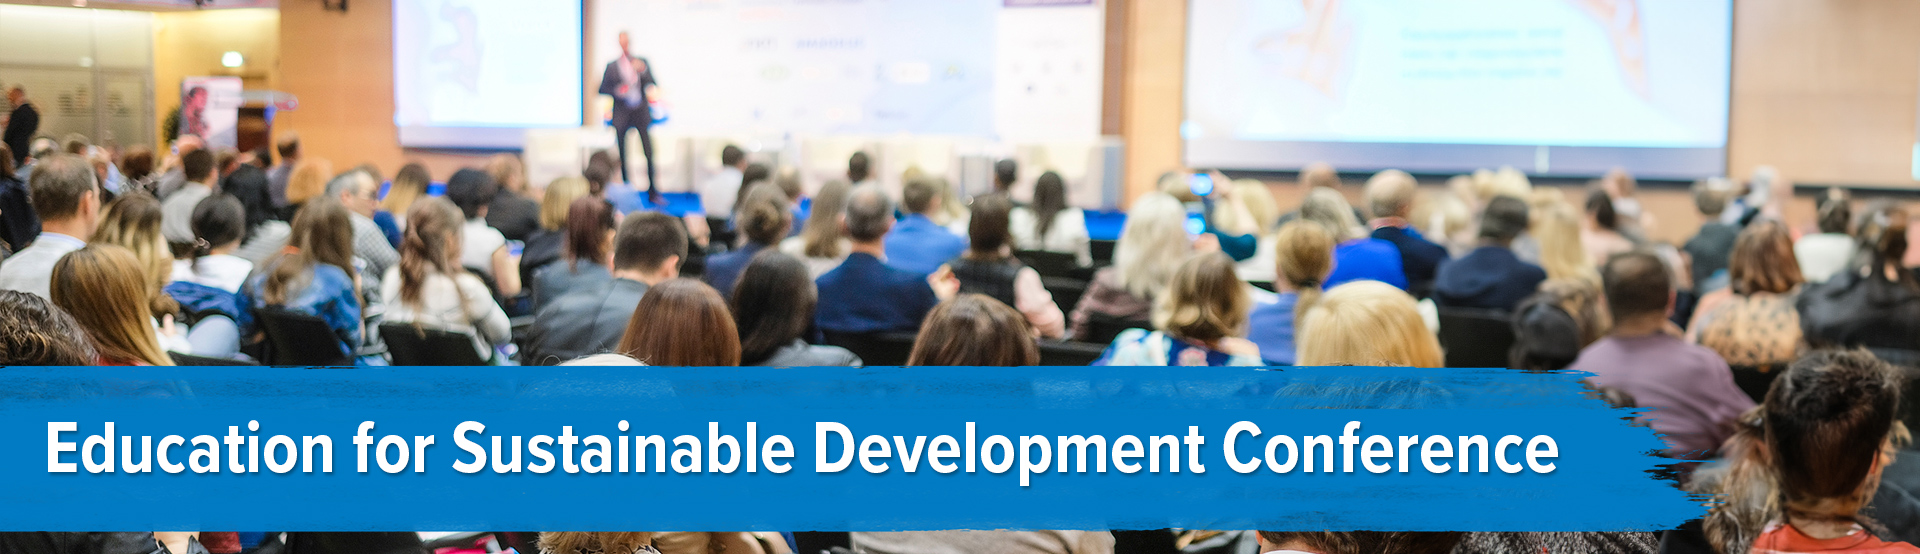 Education for Sustainable Development Conference